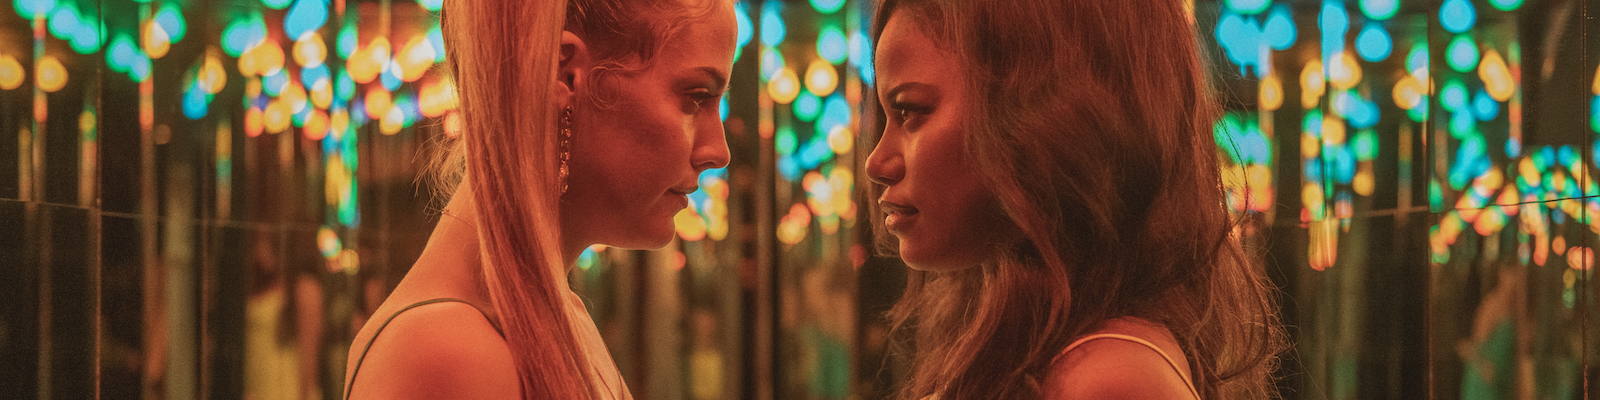 Riley Keough and Taylour Paige stand face to face in a small mirrored corridor with bright lights lining the ceiling. Image capture from Zola